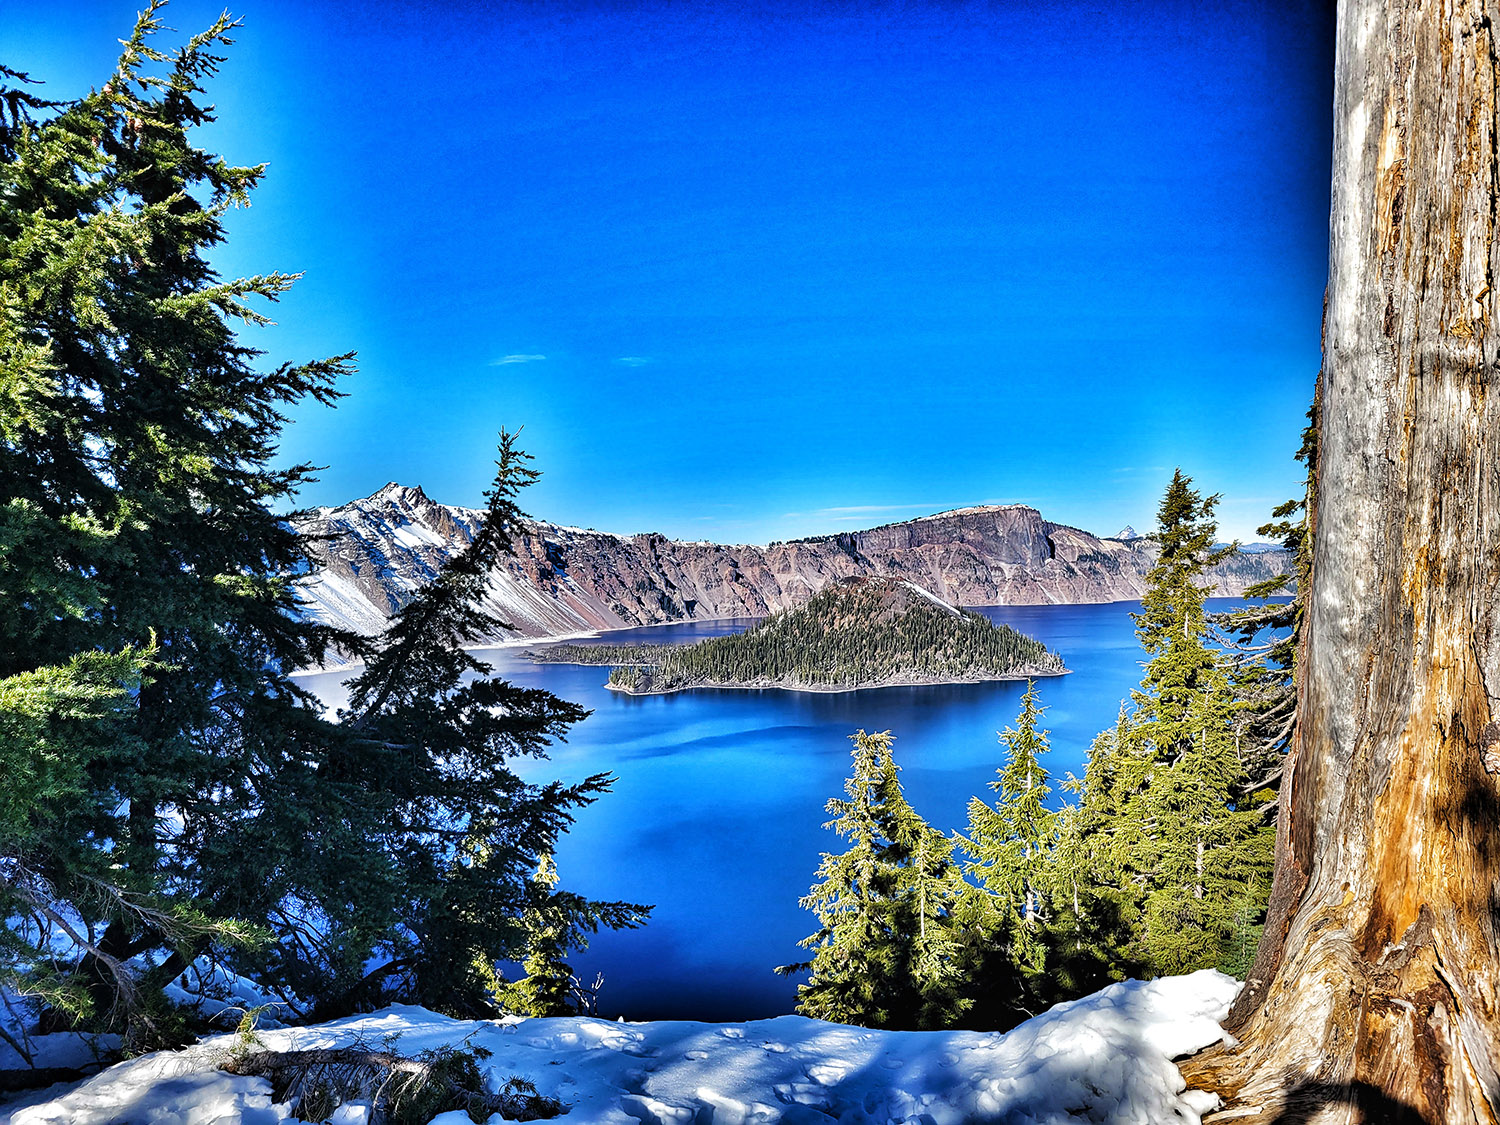 Crater Lake as seen from Rim Village southwest entrance